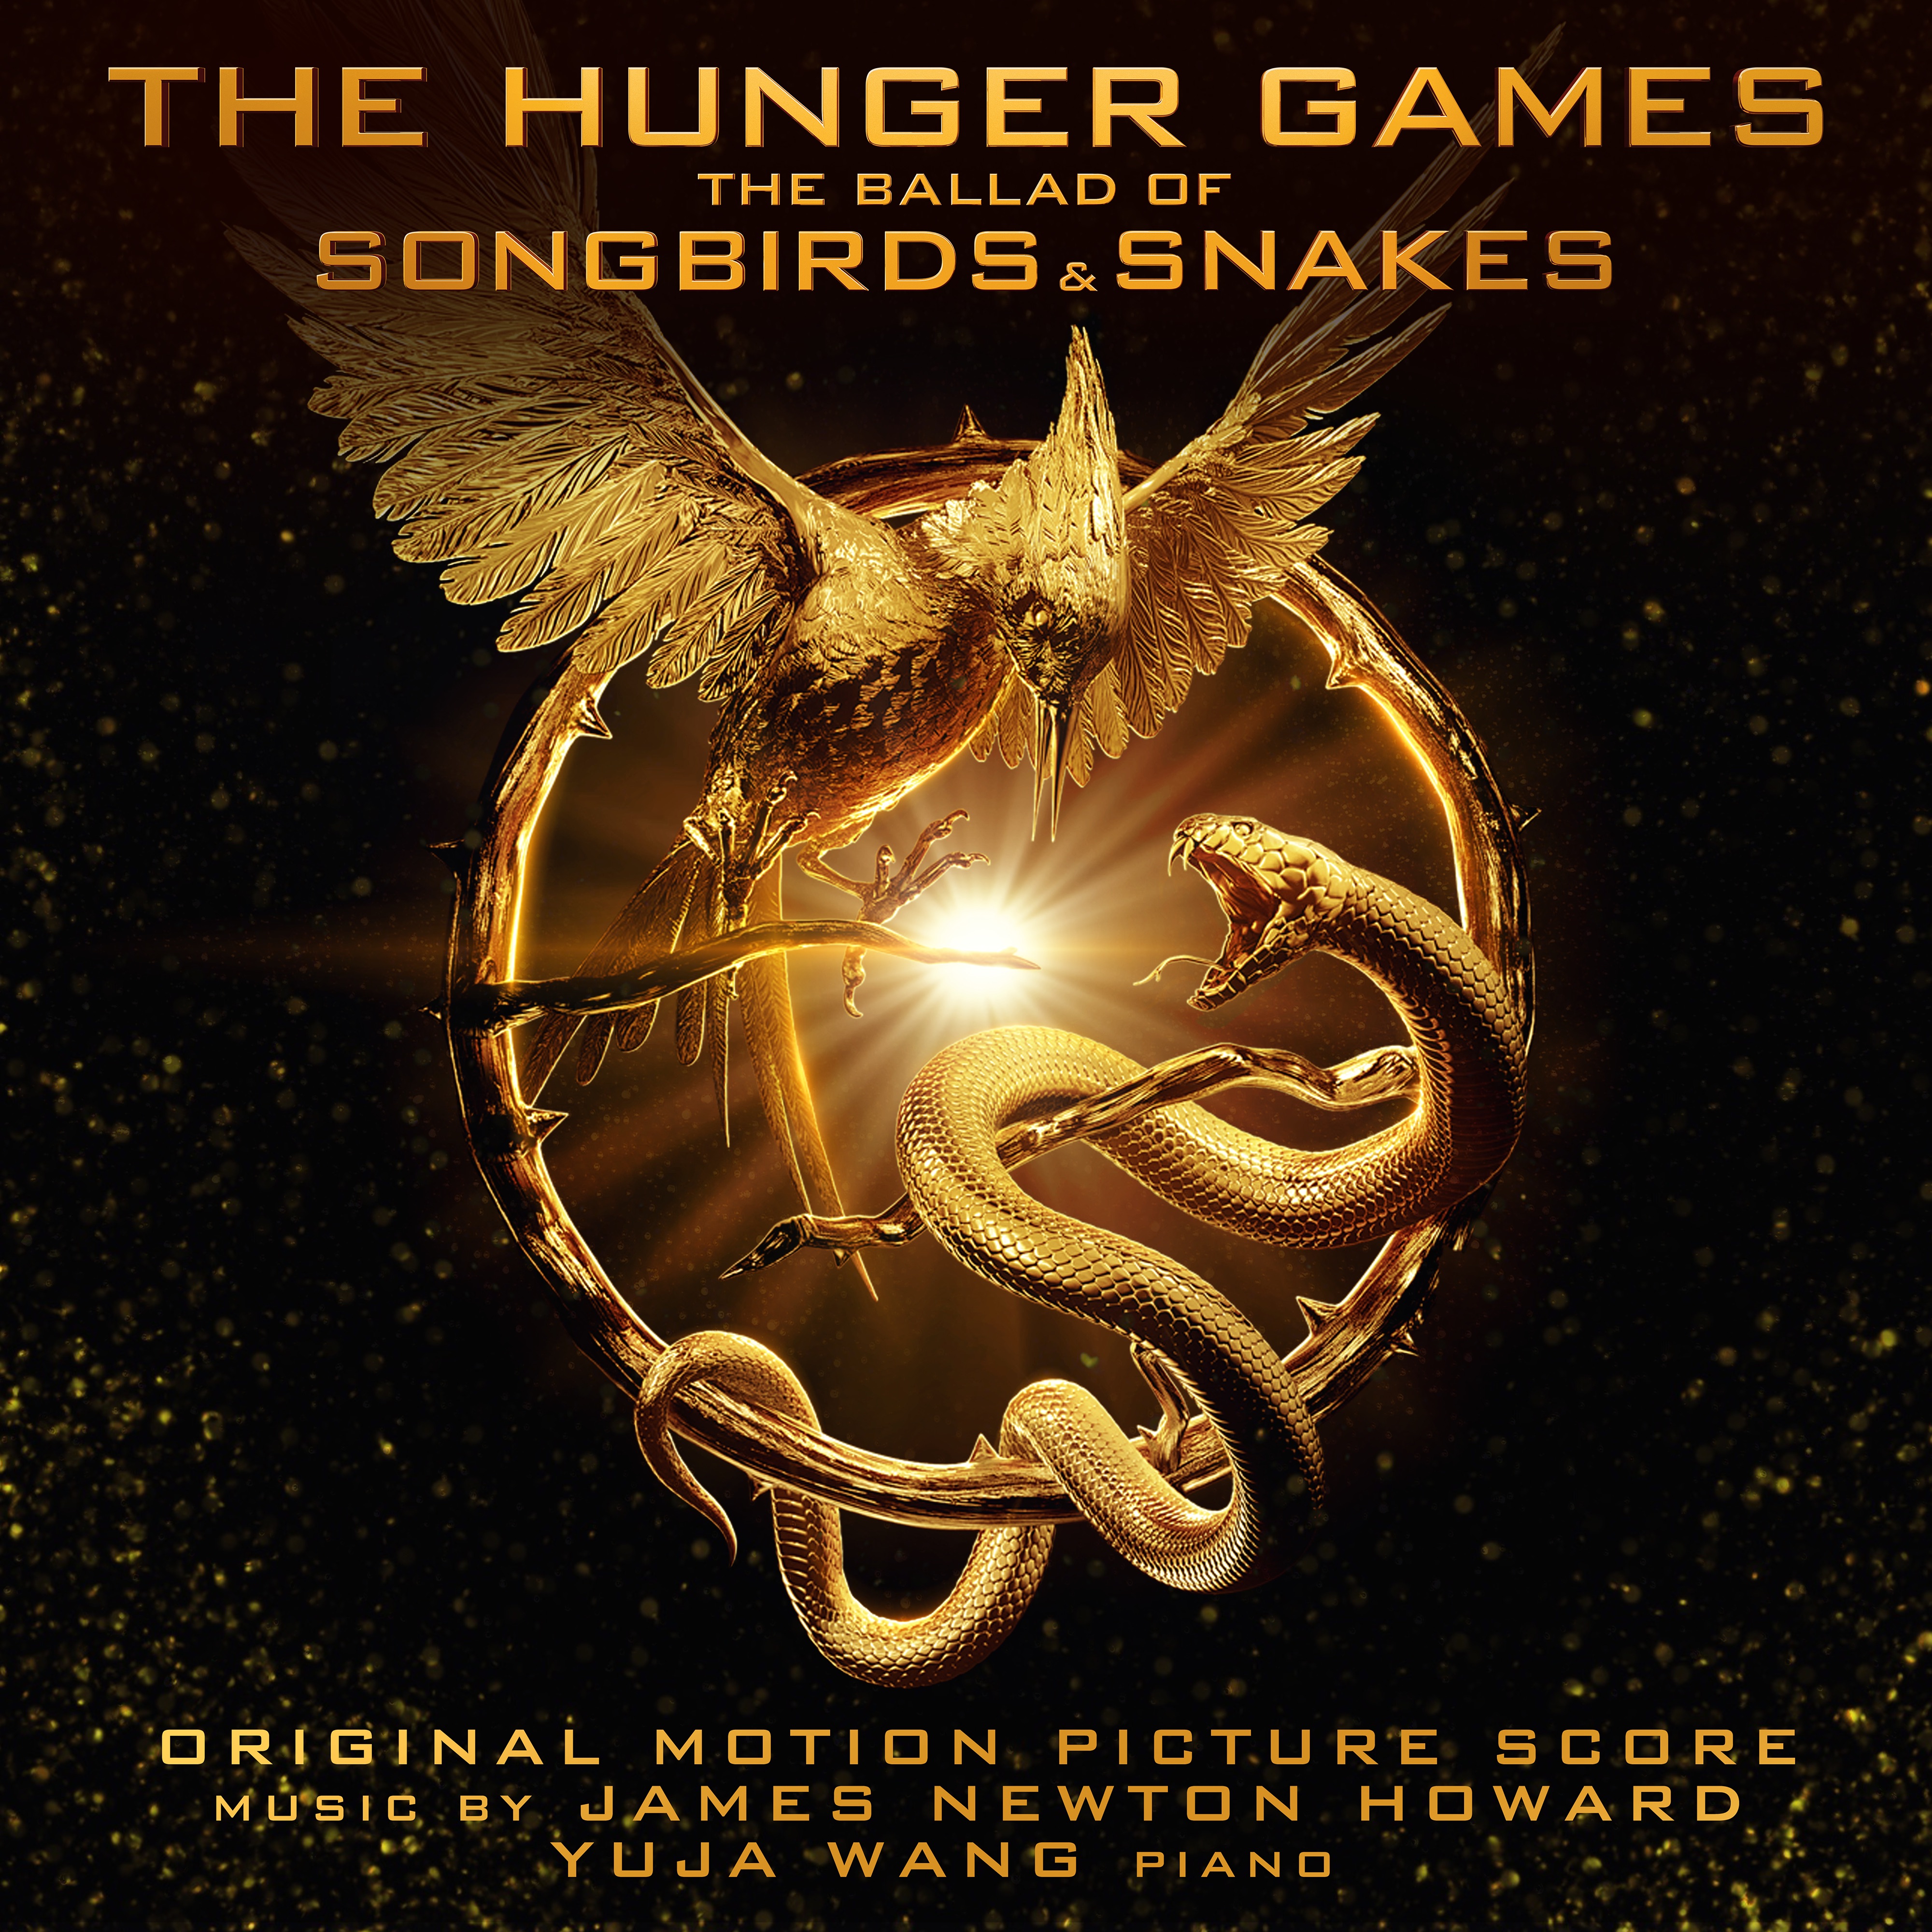 The ballad of songbirds snakes 2023. The Hunger games: the Ballad of Songbirds and Snakes. Hunger games Ballad of Songbirds. James Newton Howard.